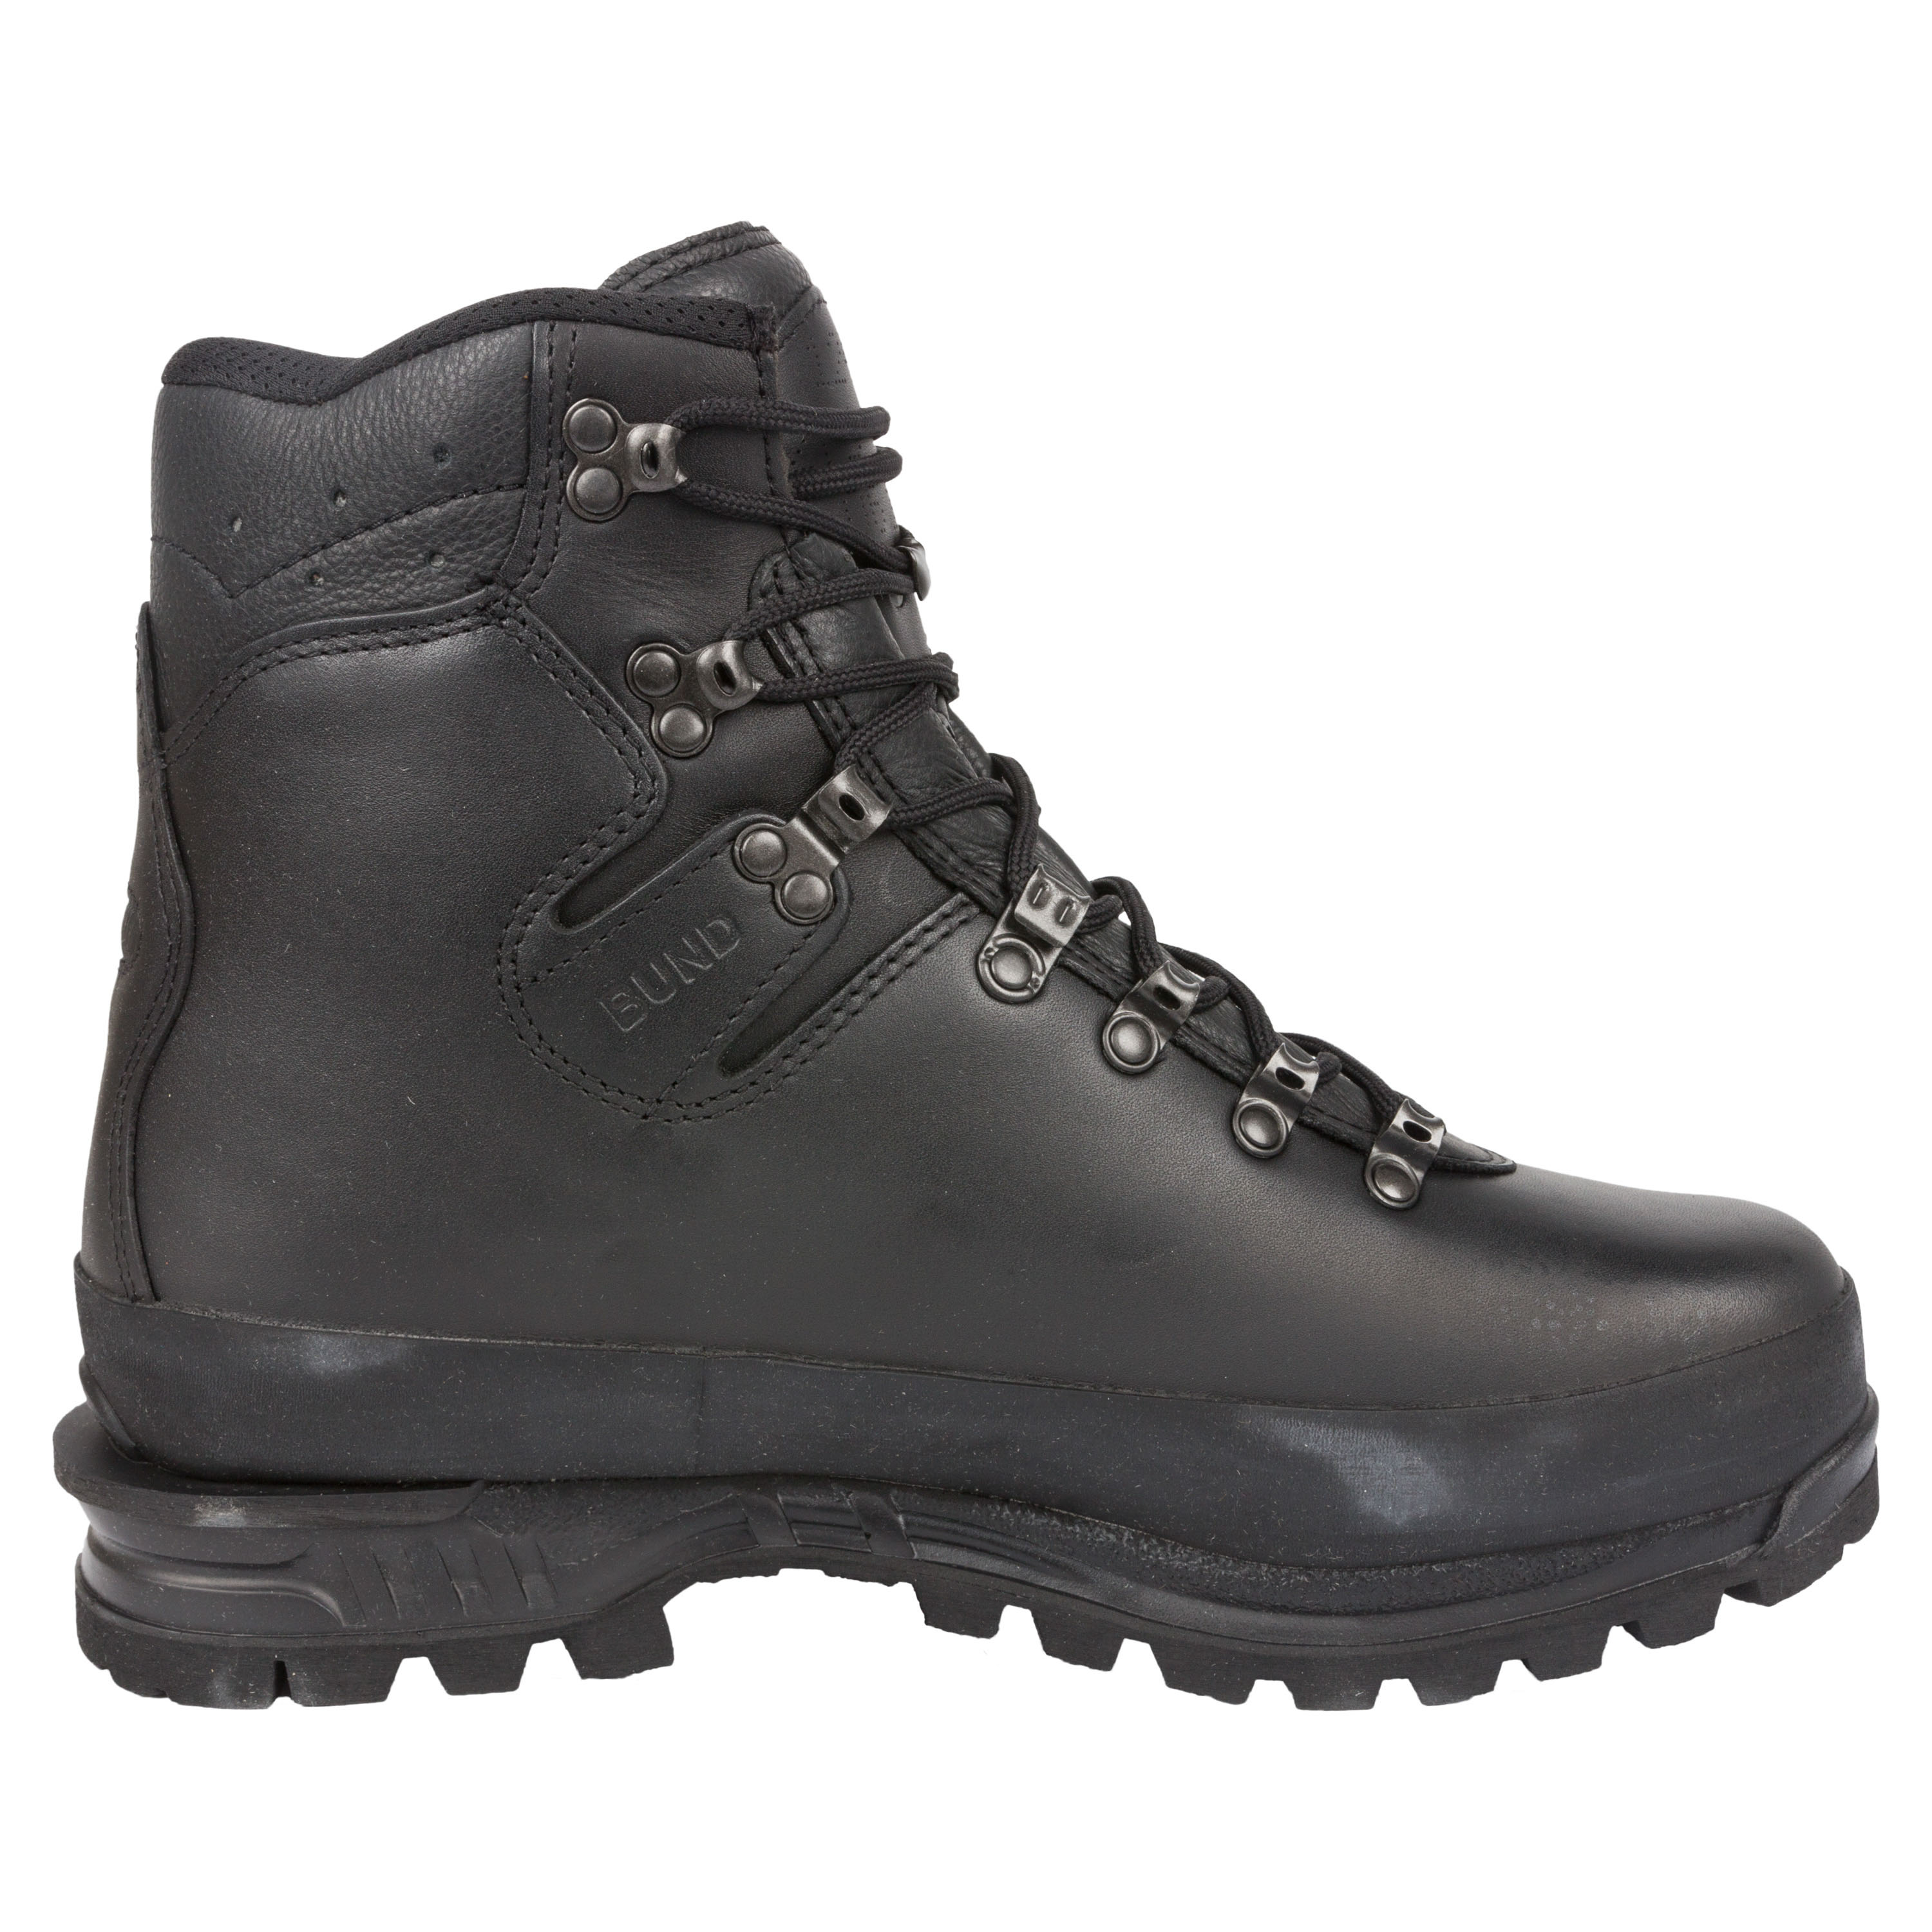 Meindl German Army Mountain Boots Review - Army Military